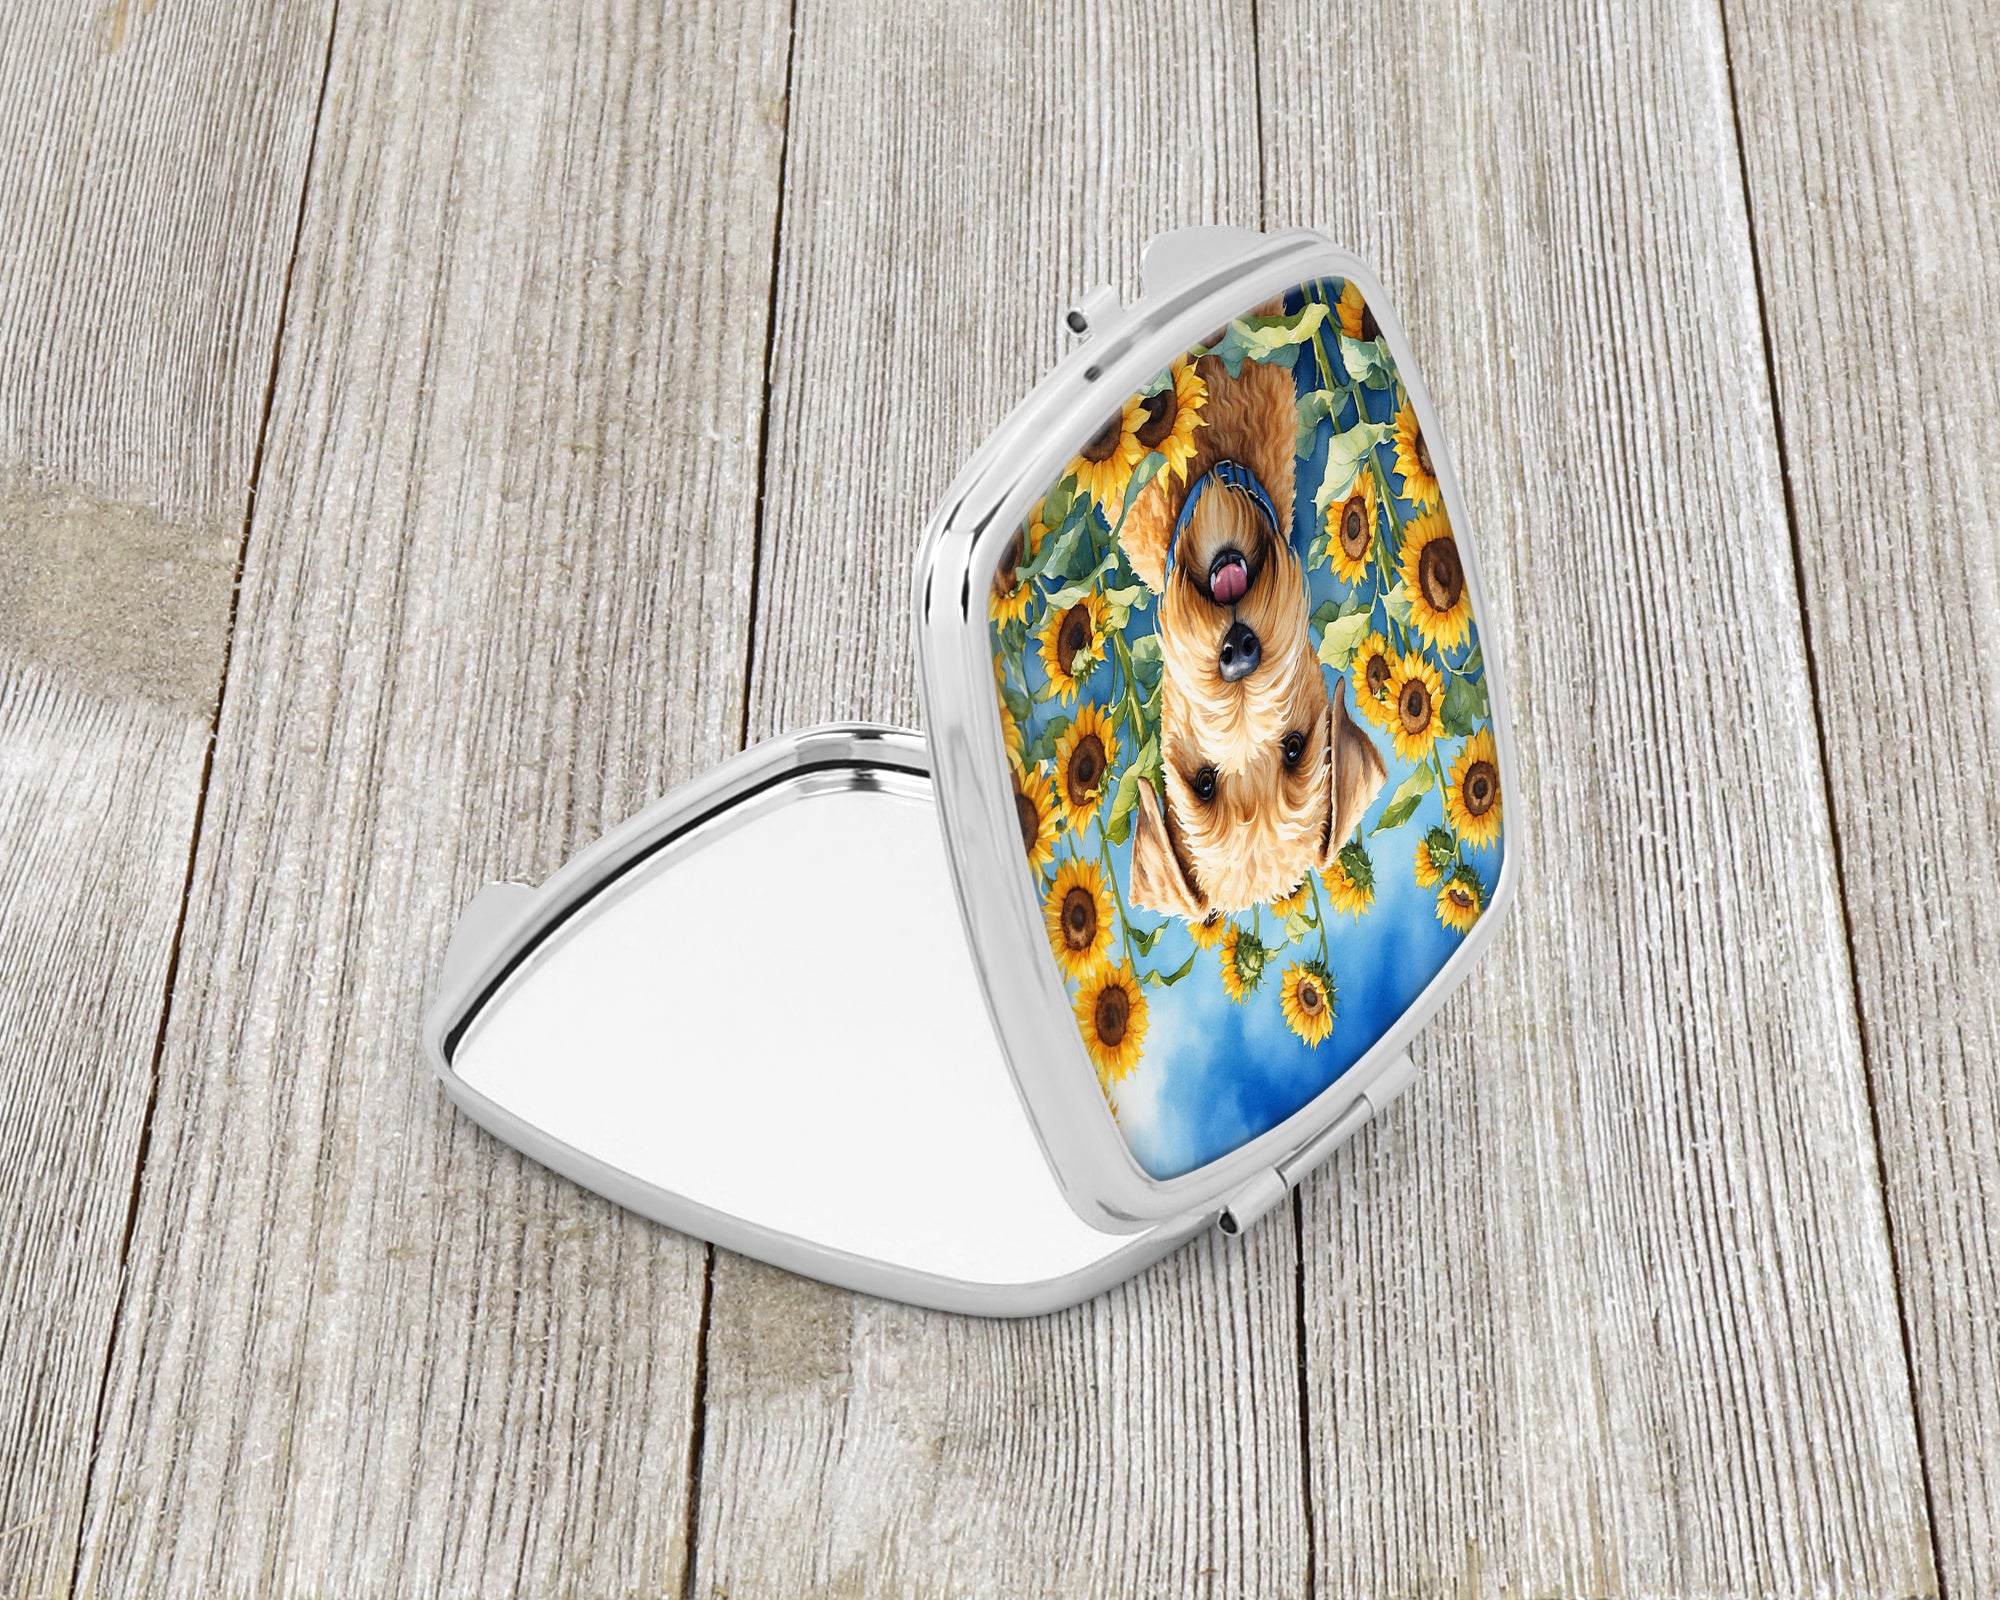 Buy this Wheaten Terrier in Sunflowers Compact Mirror